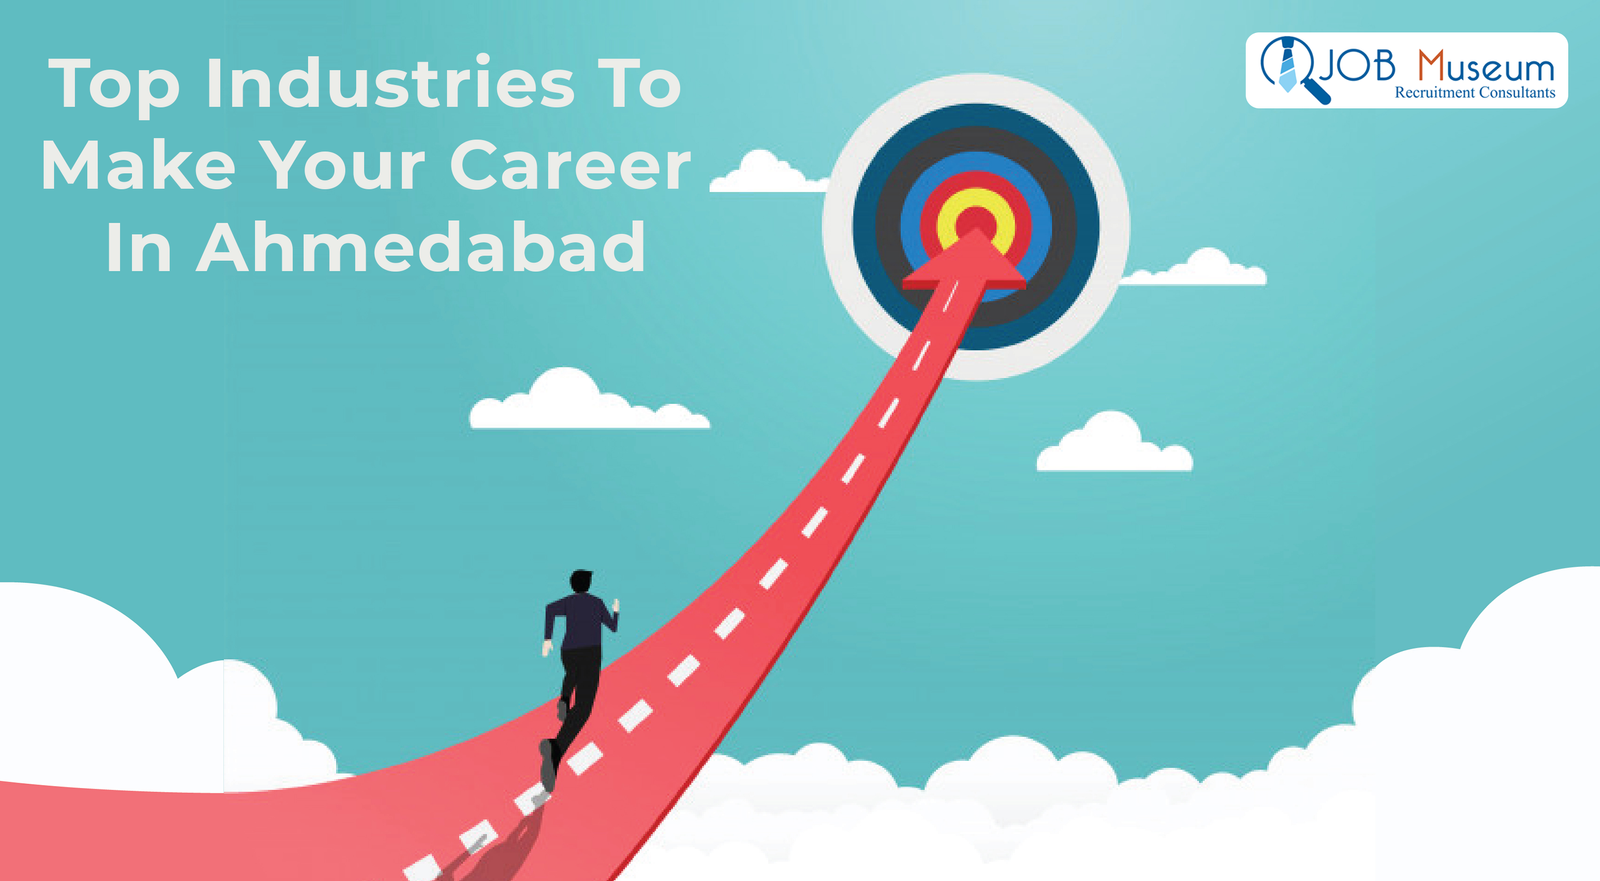 Top Industries to make your career in Ahmedabad